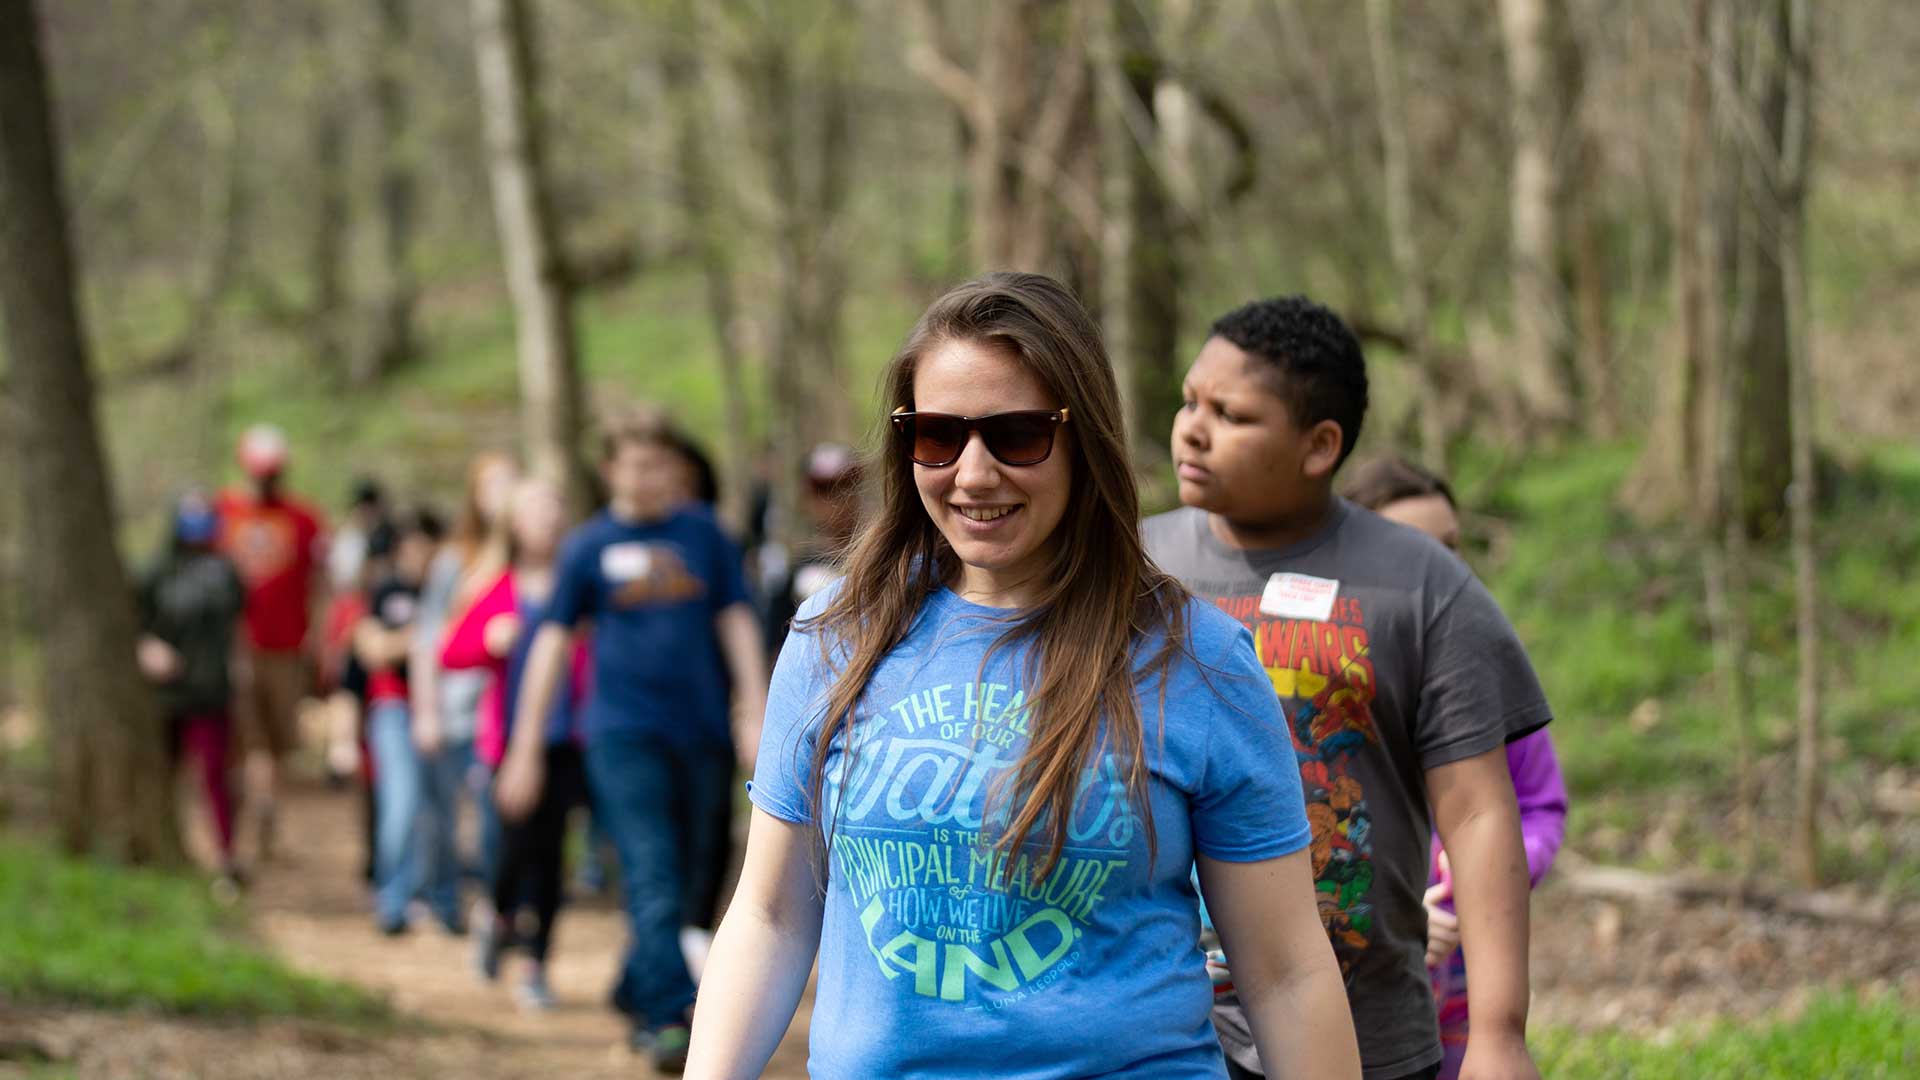 A group of students get active by taking a stroll through a wooded area.